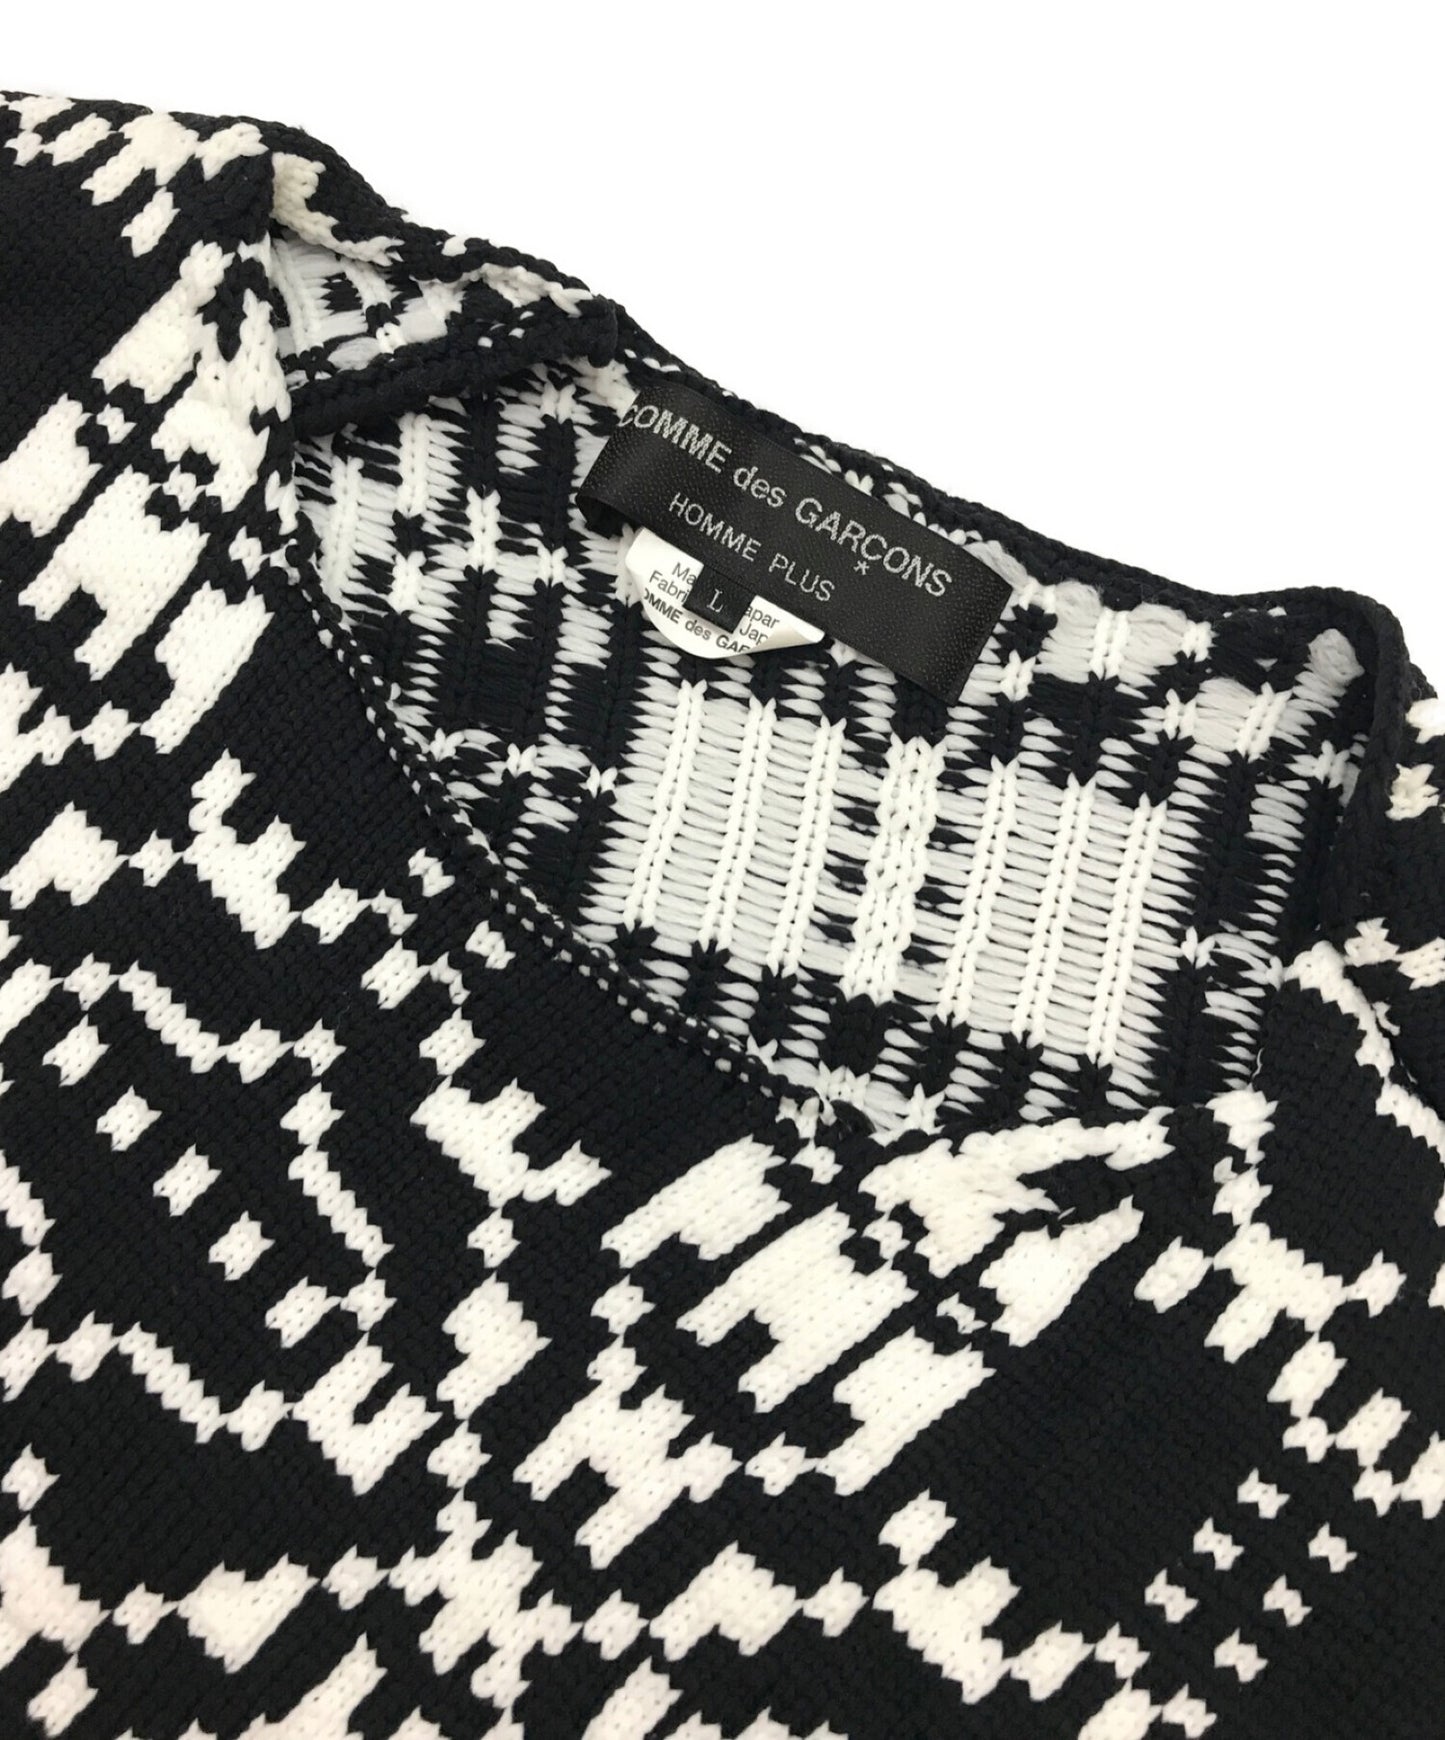 Comme des Garcons Homme Plus Knit / 21Aw / Geometry AD2021 PH-N010